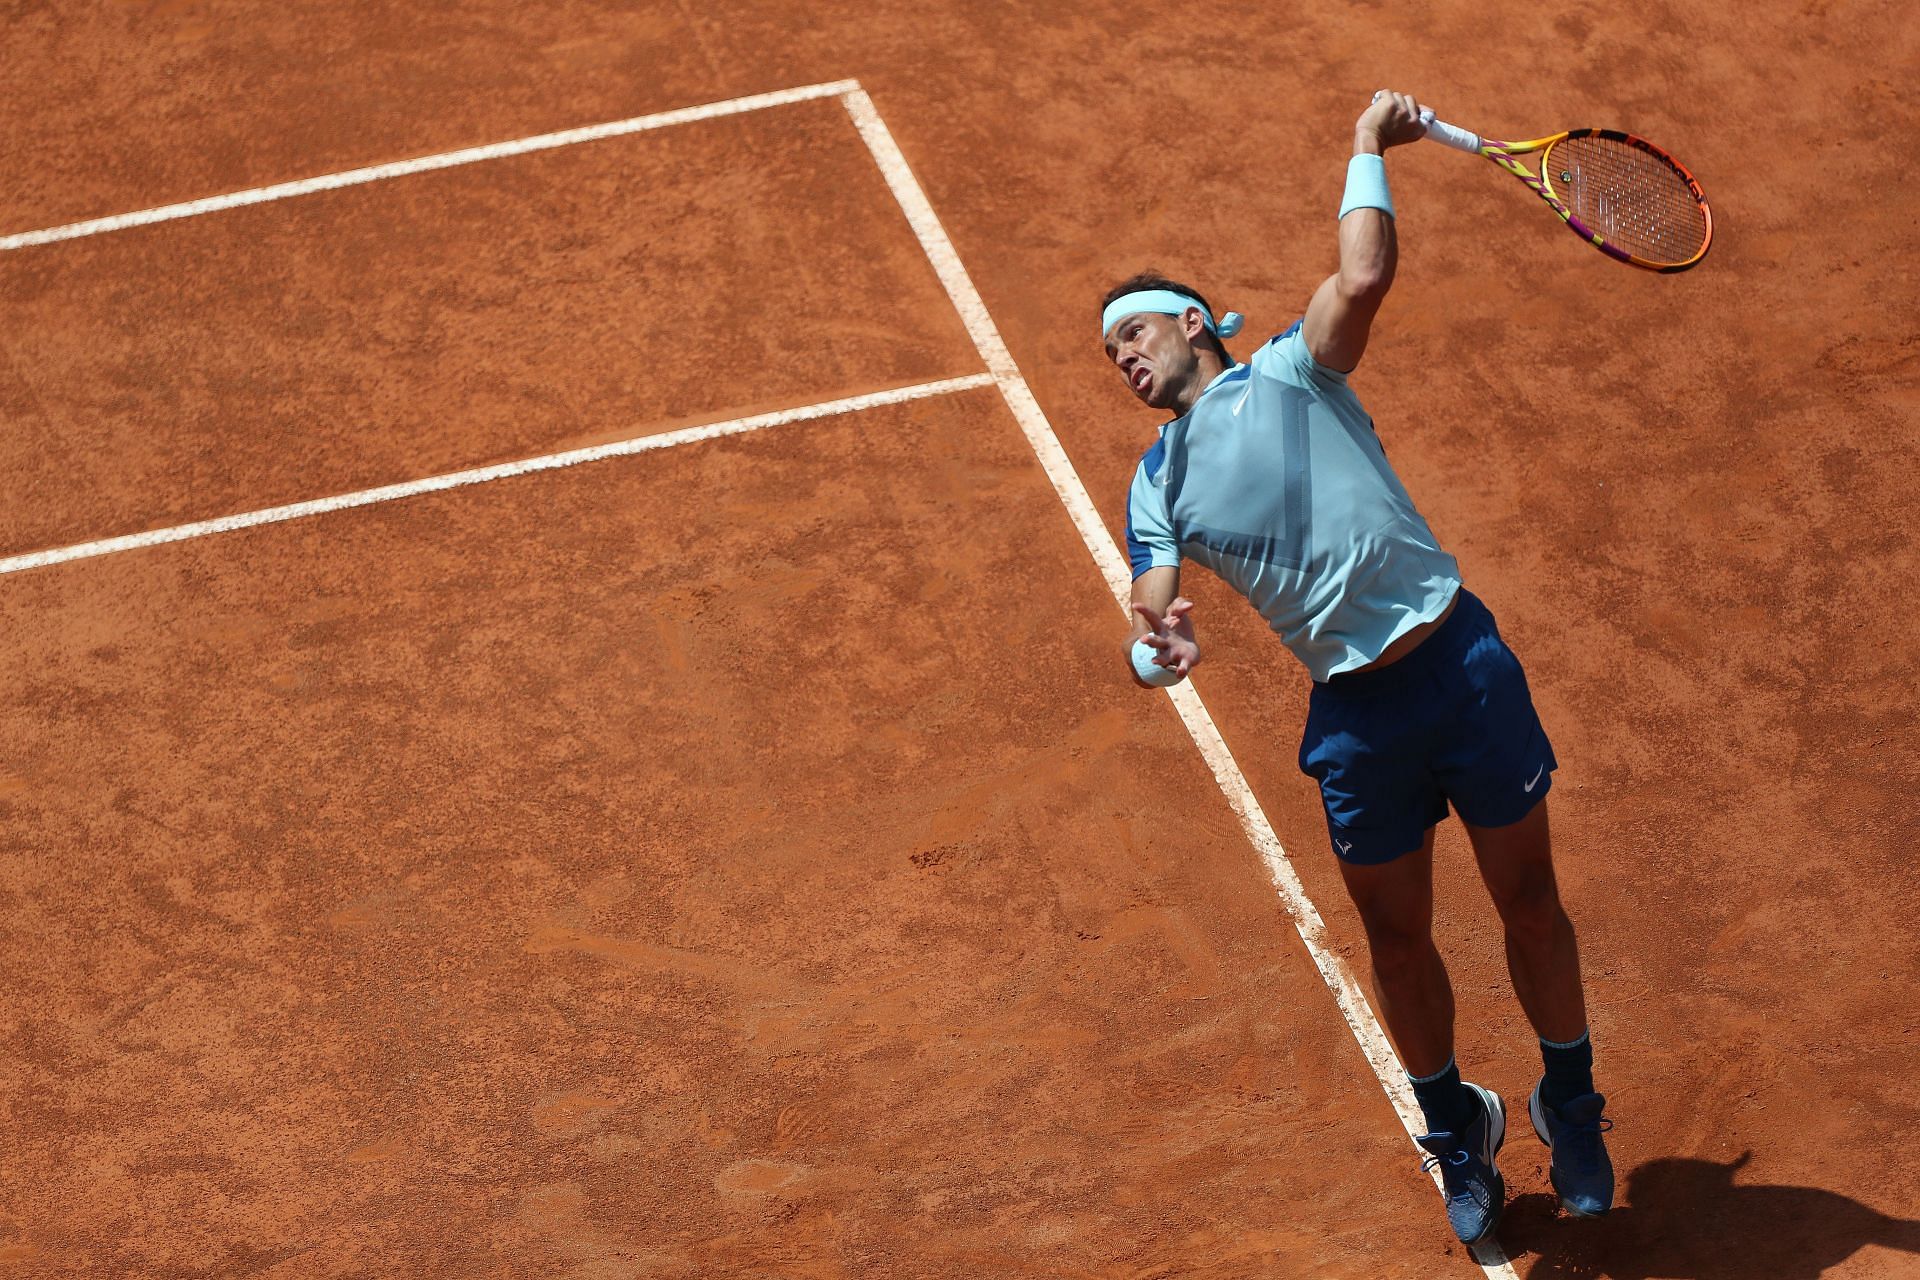 &#039;The King of Clay&#039; is no slouch on other surfaces too.